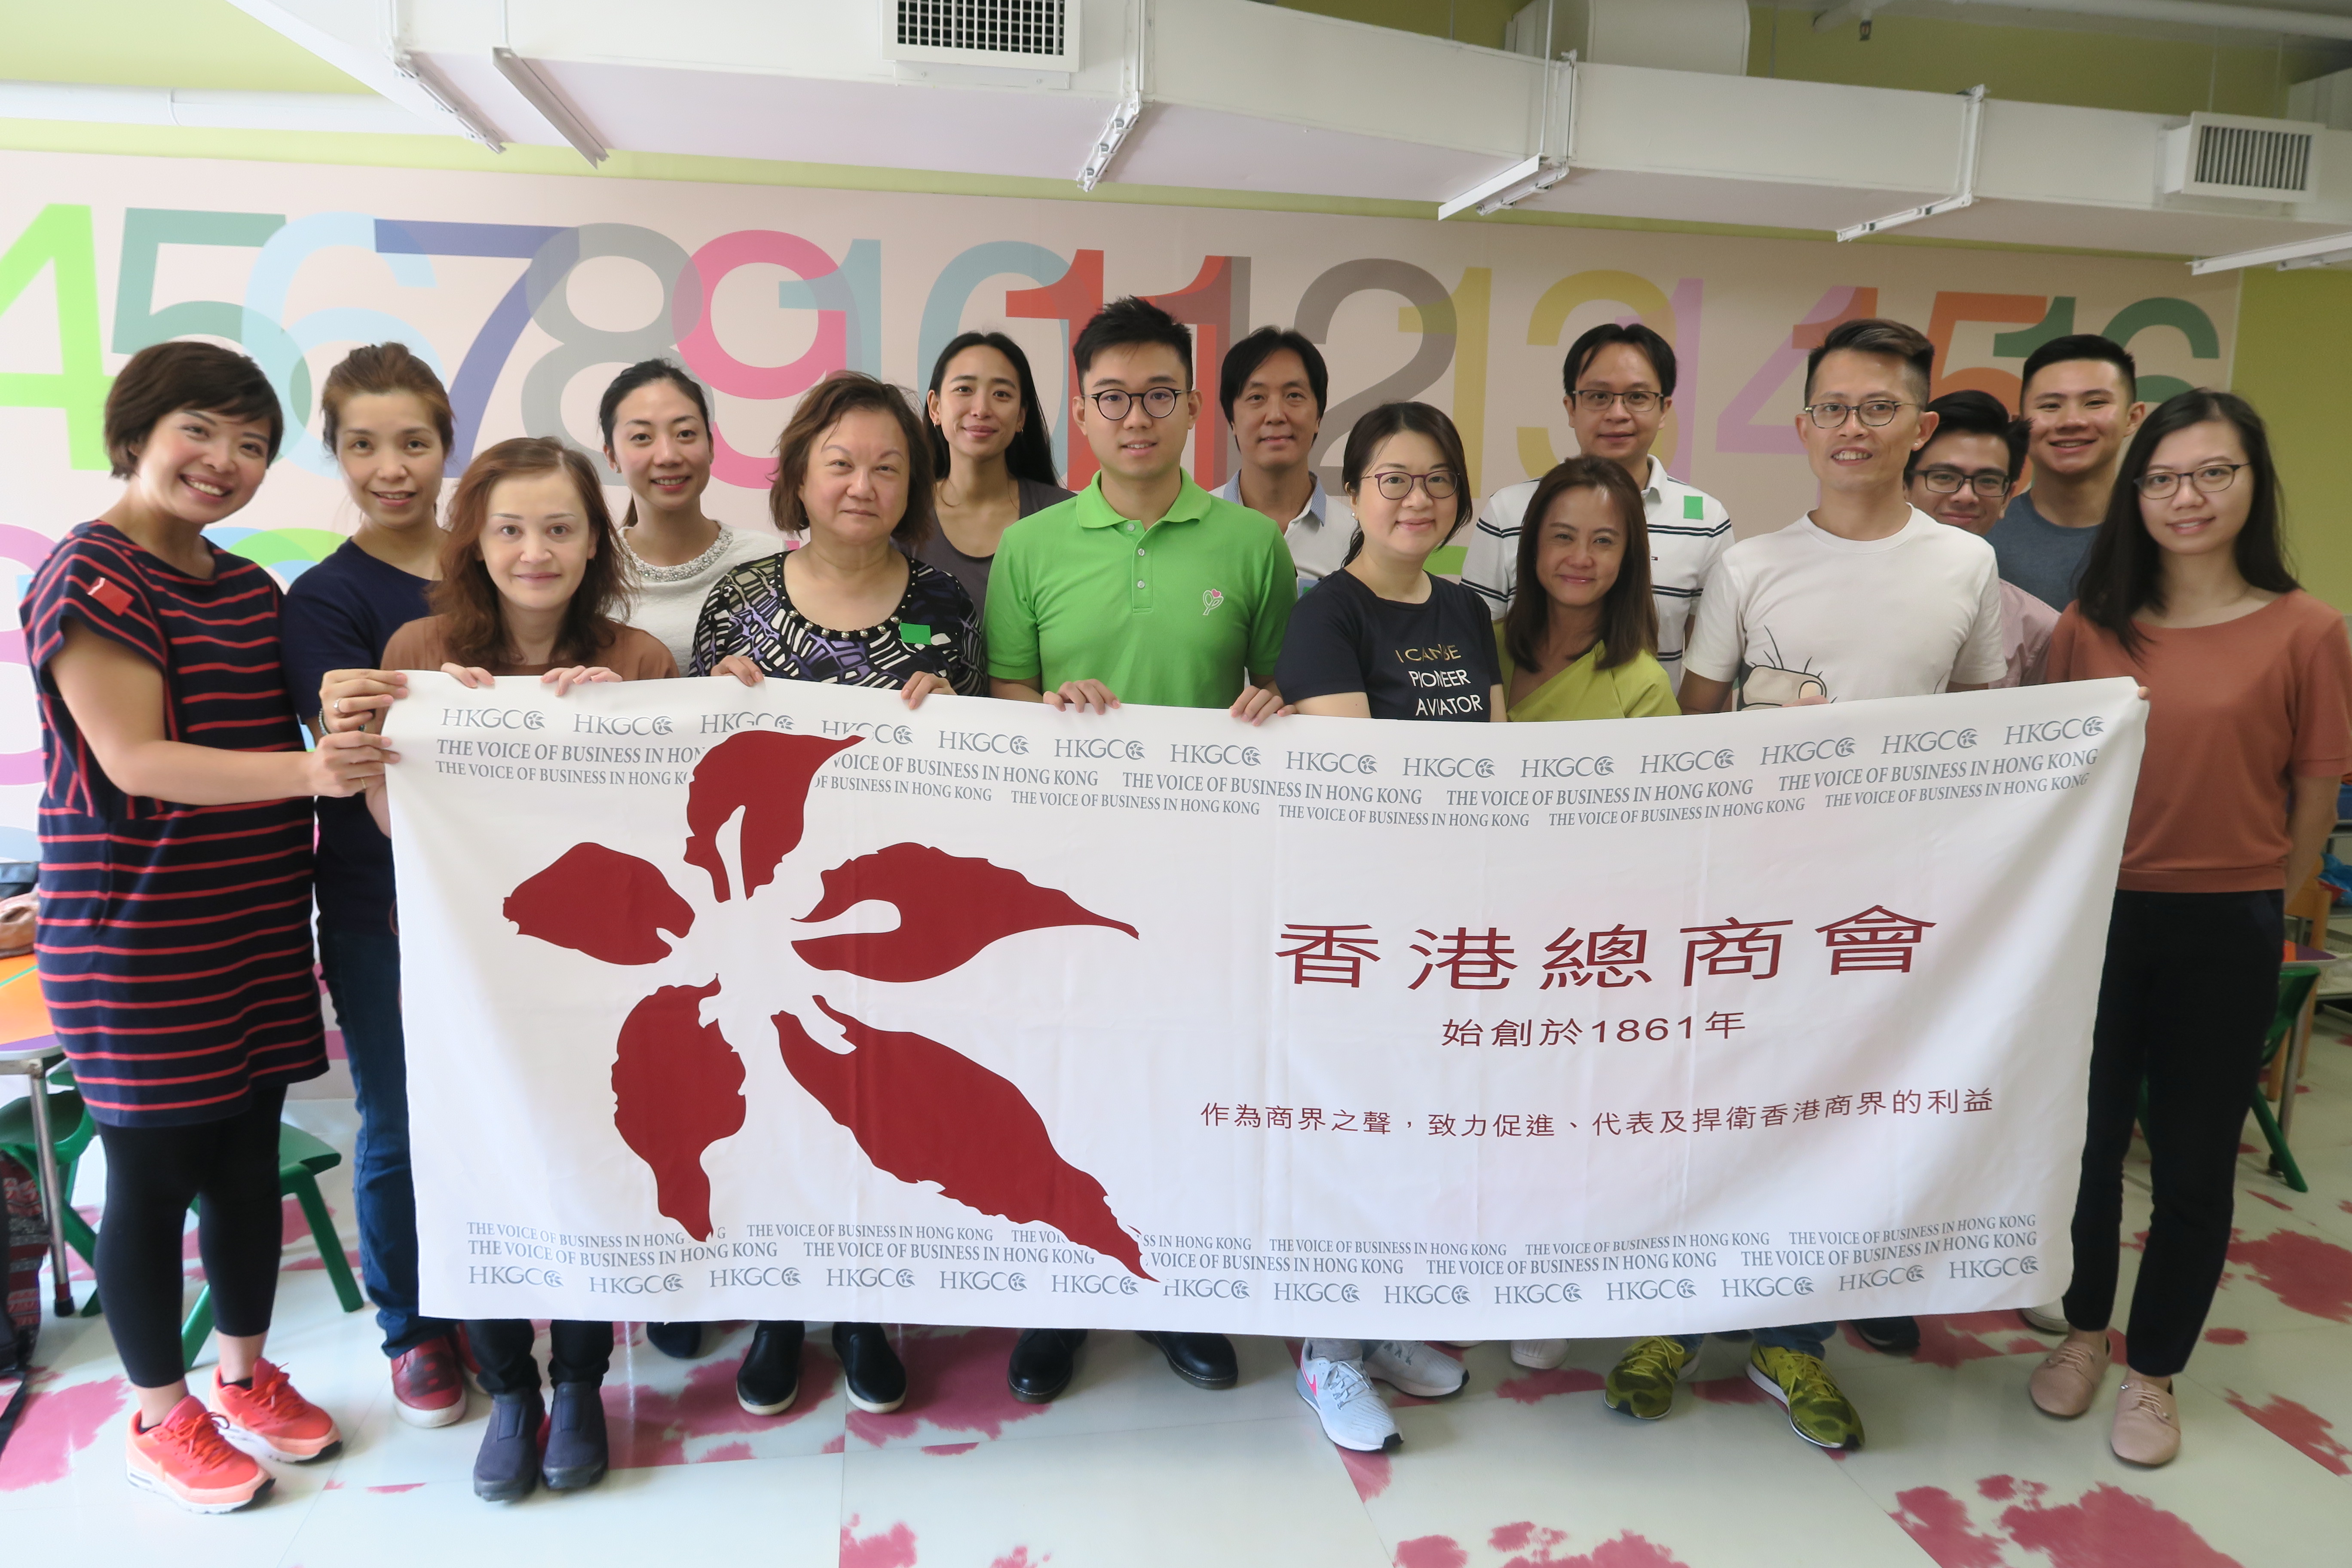 Fun Volunteer Experience: Visit to Hong Kong Children's Discovery Museum & Dim Sum Lunch